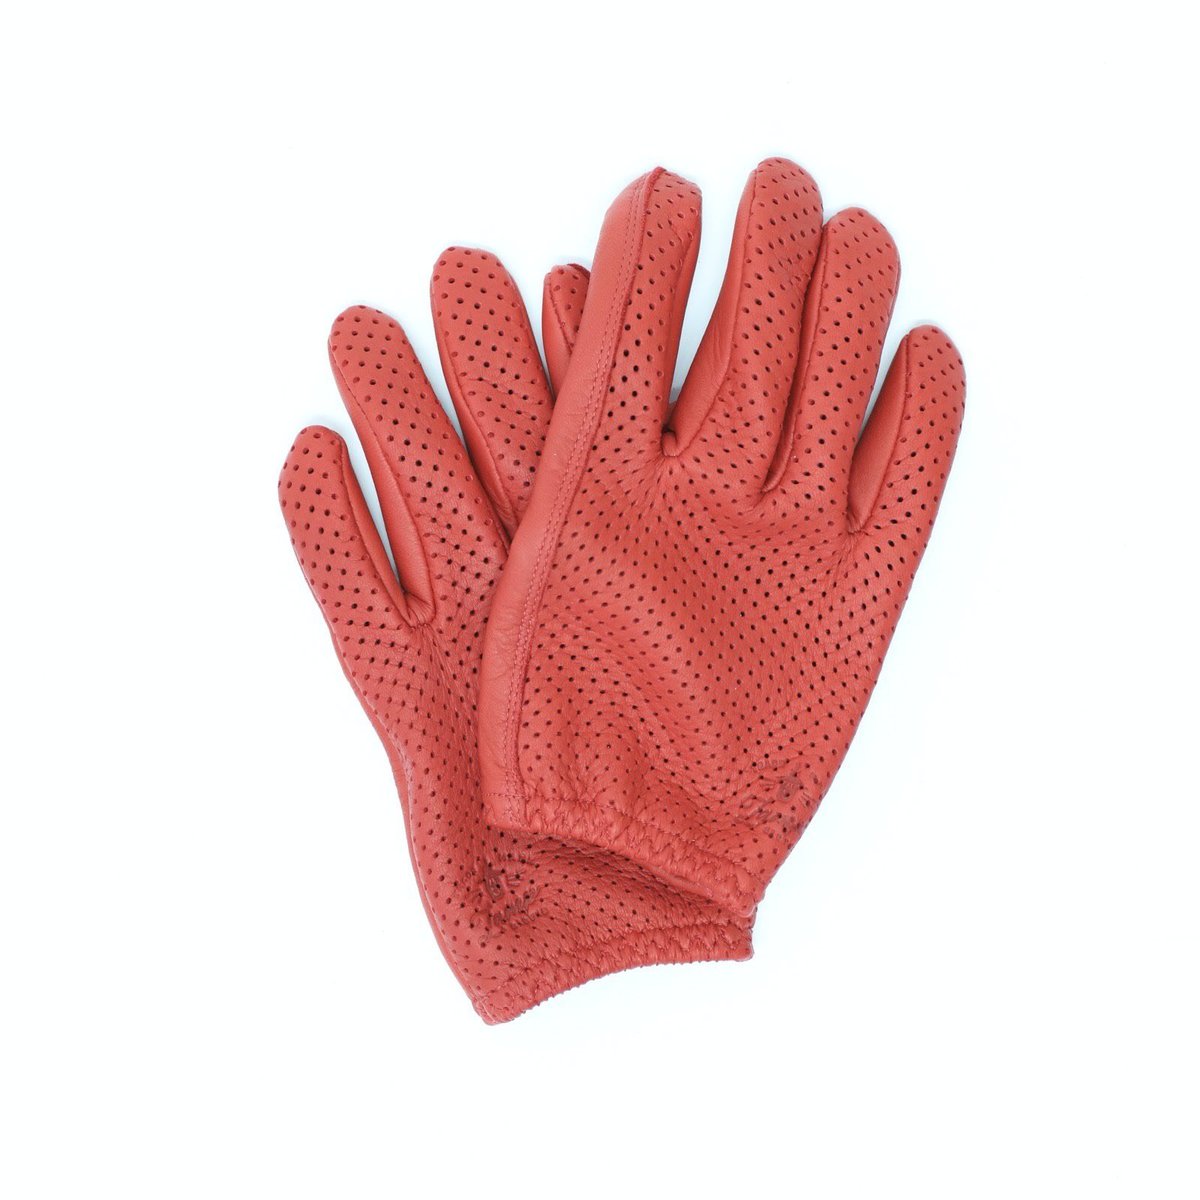 LAMP GLOVES - PUNCHING GLOVE (RED)